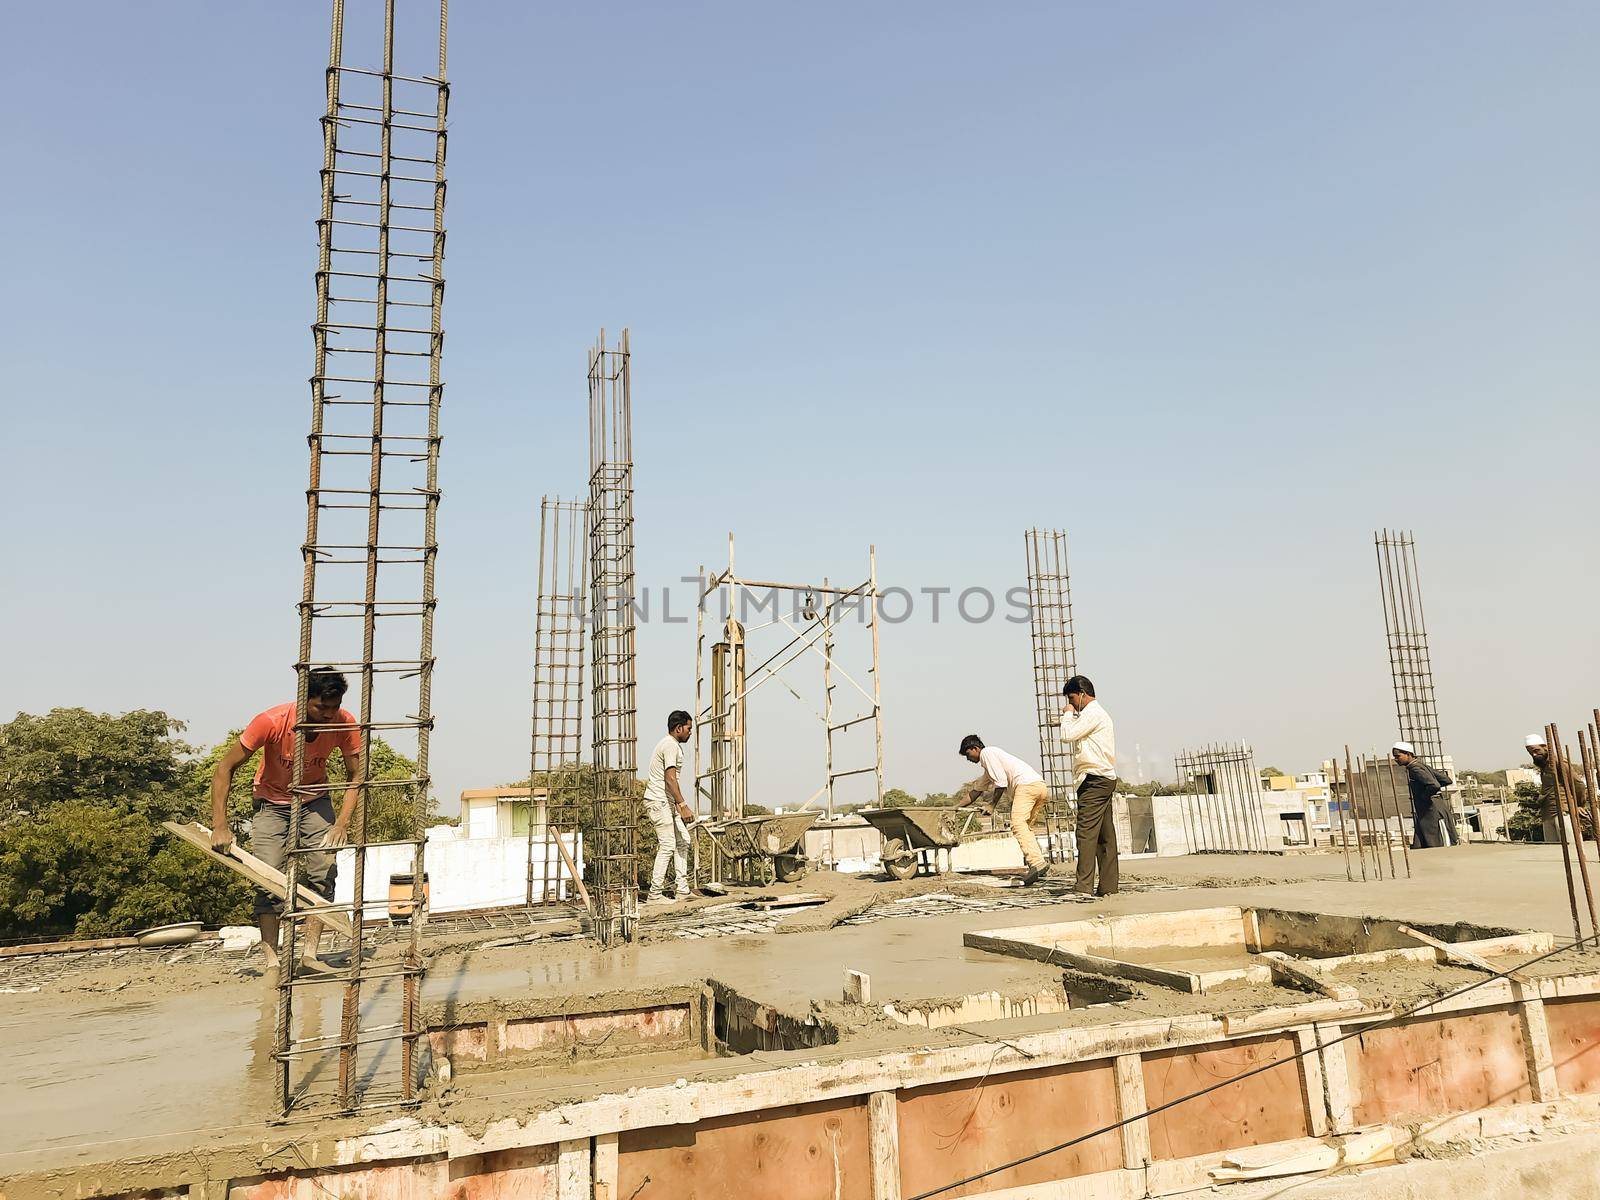 pouring concrete slab - concrete pouring during commercial concreting floors of buildings in construction by tabishere